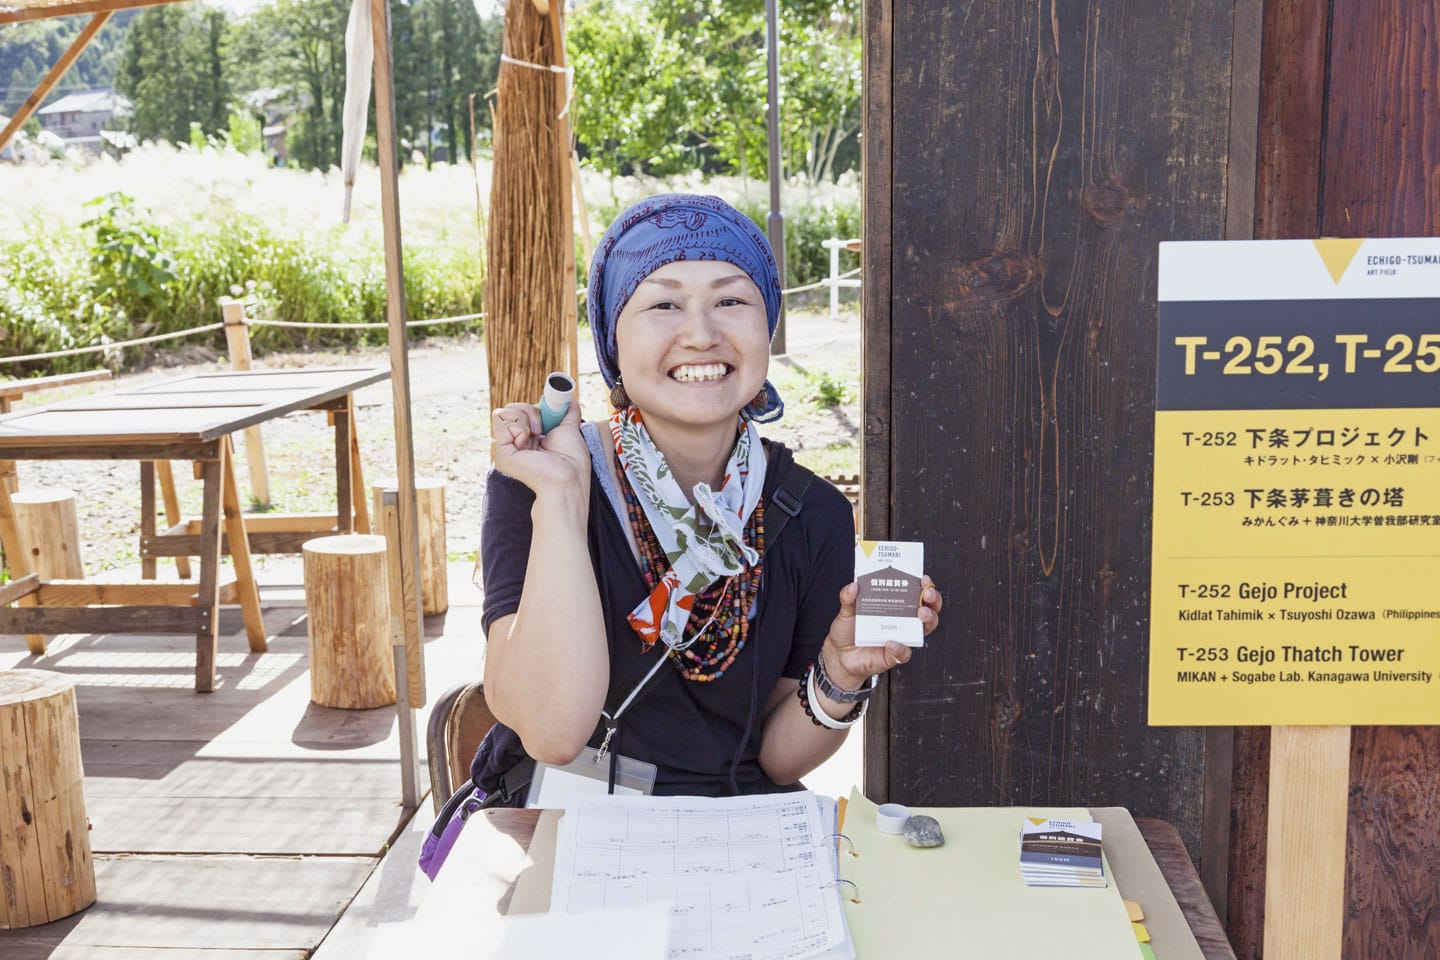 During the festival, local villagers act as volunteers to receive domestic and foreign tourists. Echigo-Tsumari Earth Art Festival official website map